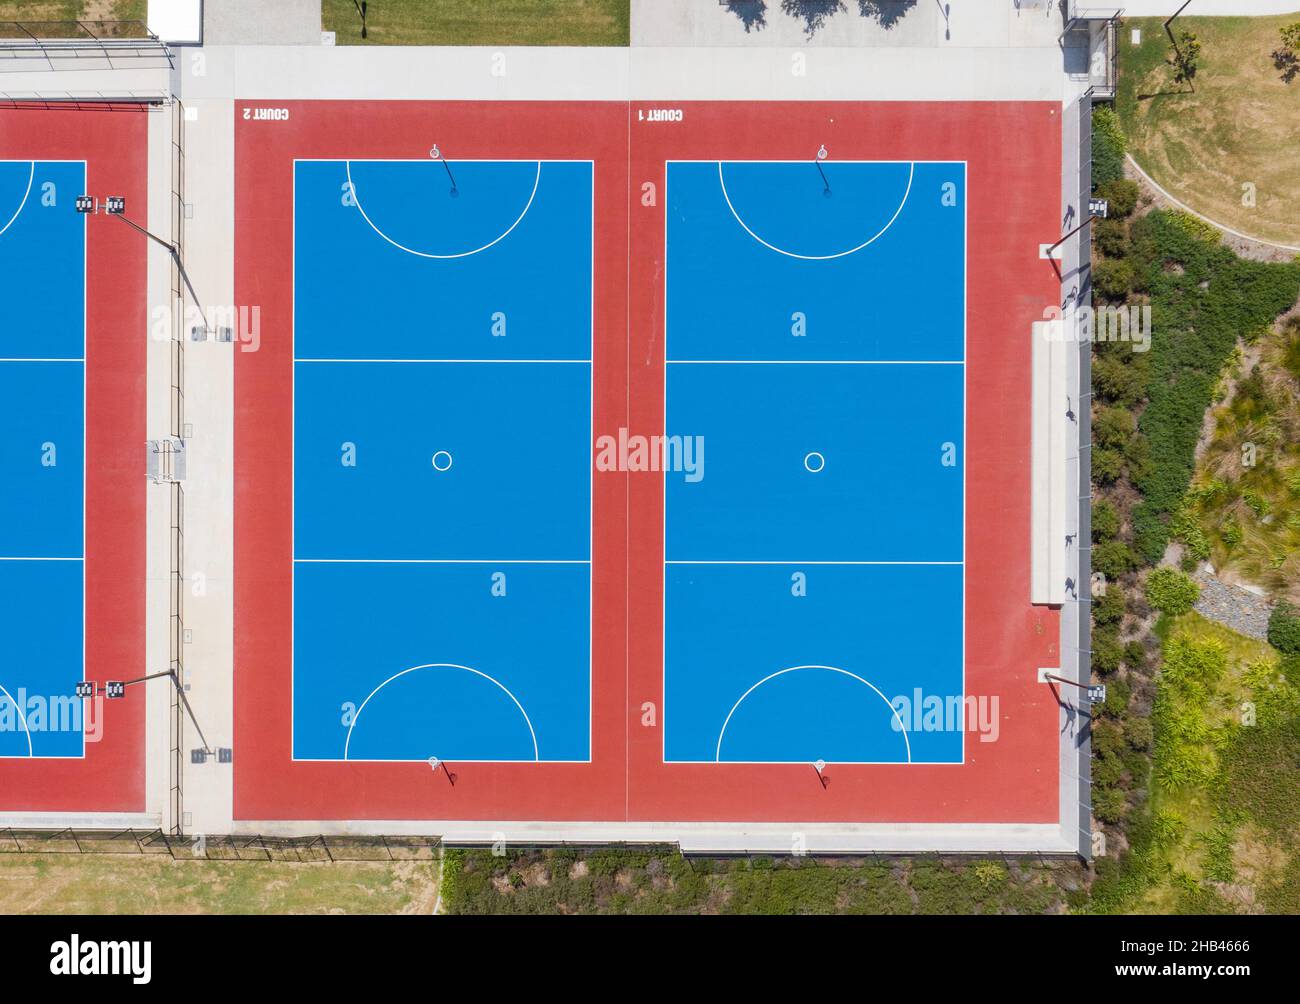 Aerial view of netball and sports courts Stock Photo